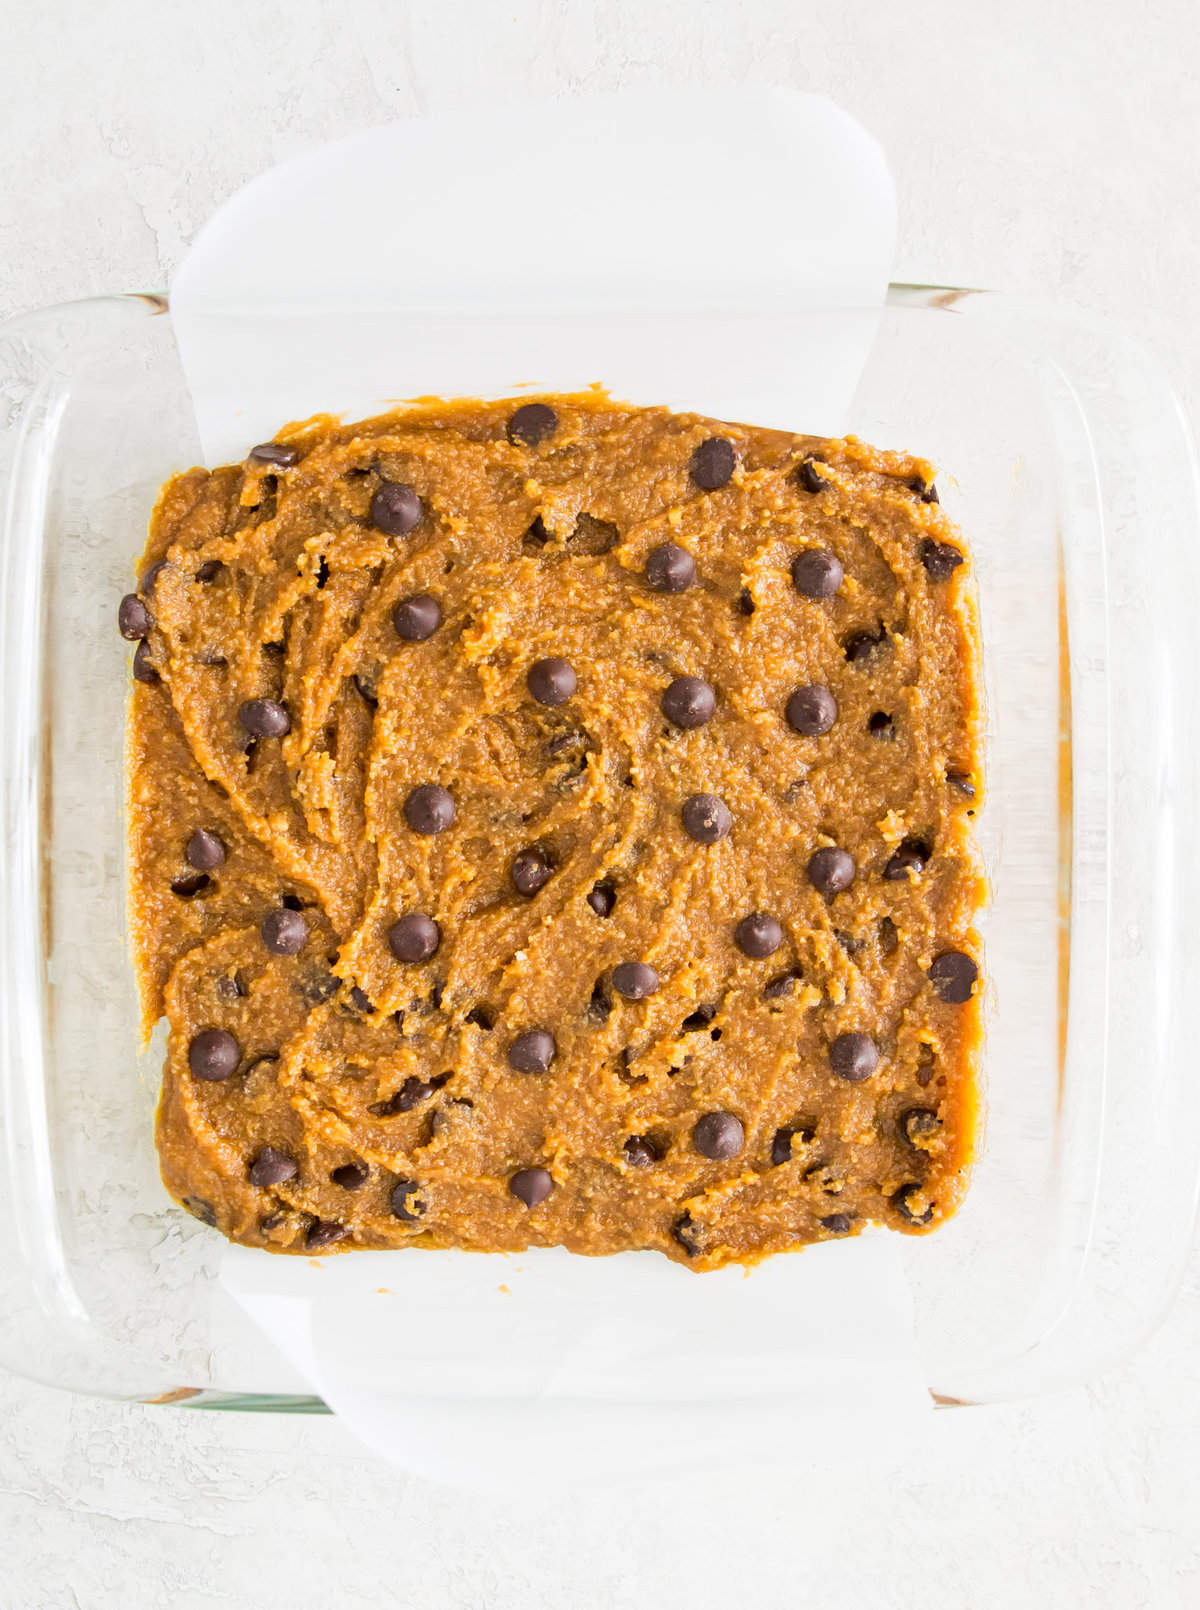 Chocolate chip cookie dough spread out in a baking pan lined with parchment paper.